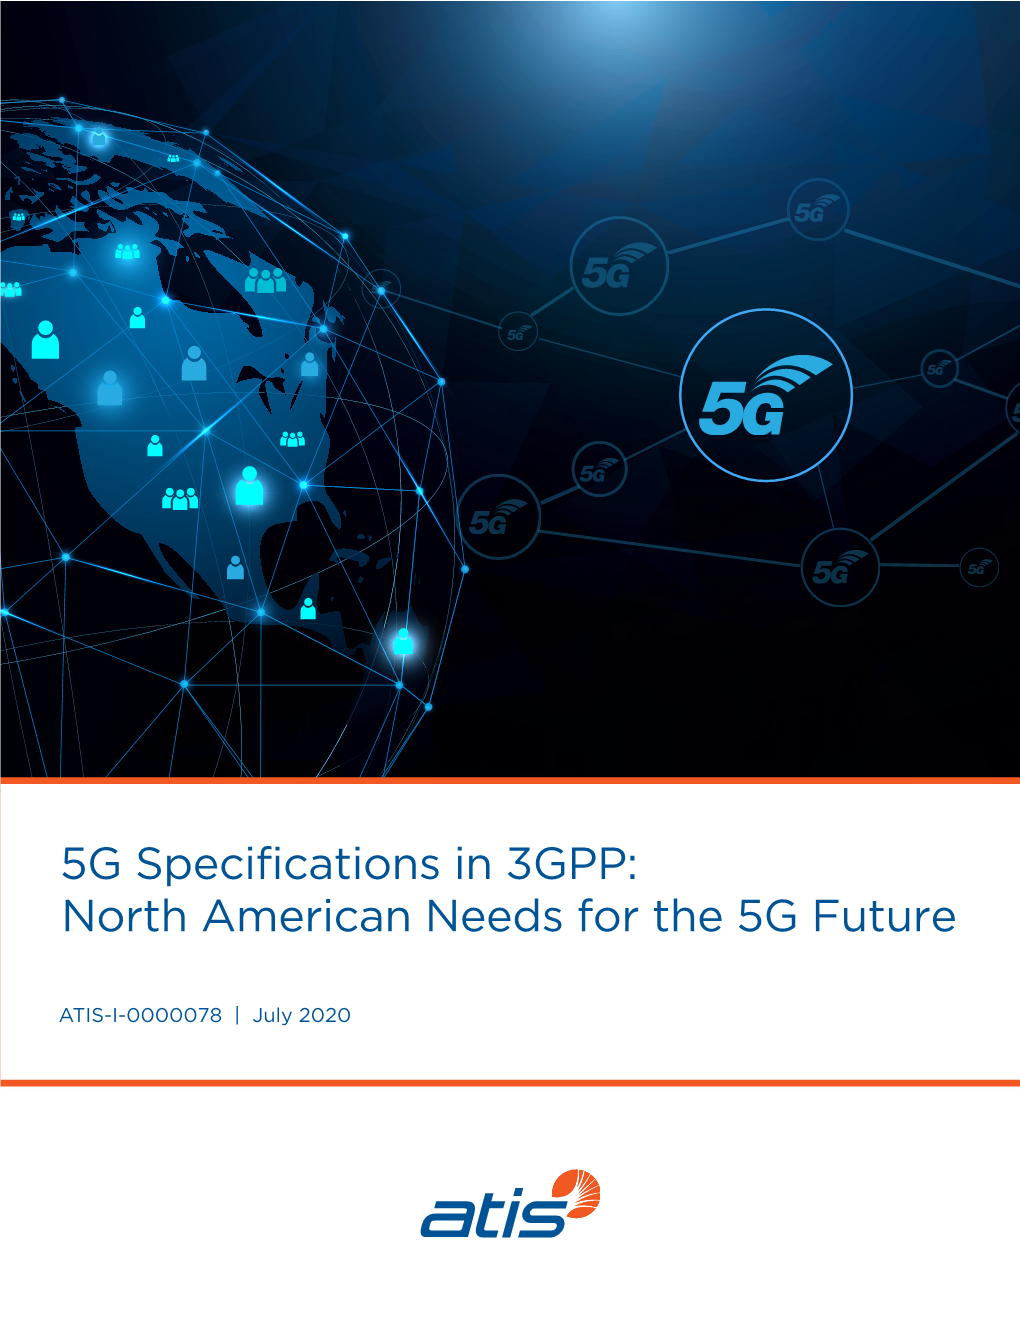 5G Specifications in 3GPP: North American Needs for the 5G Future